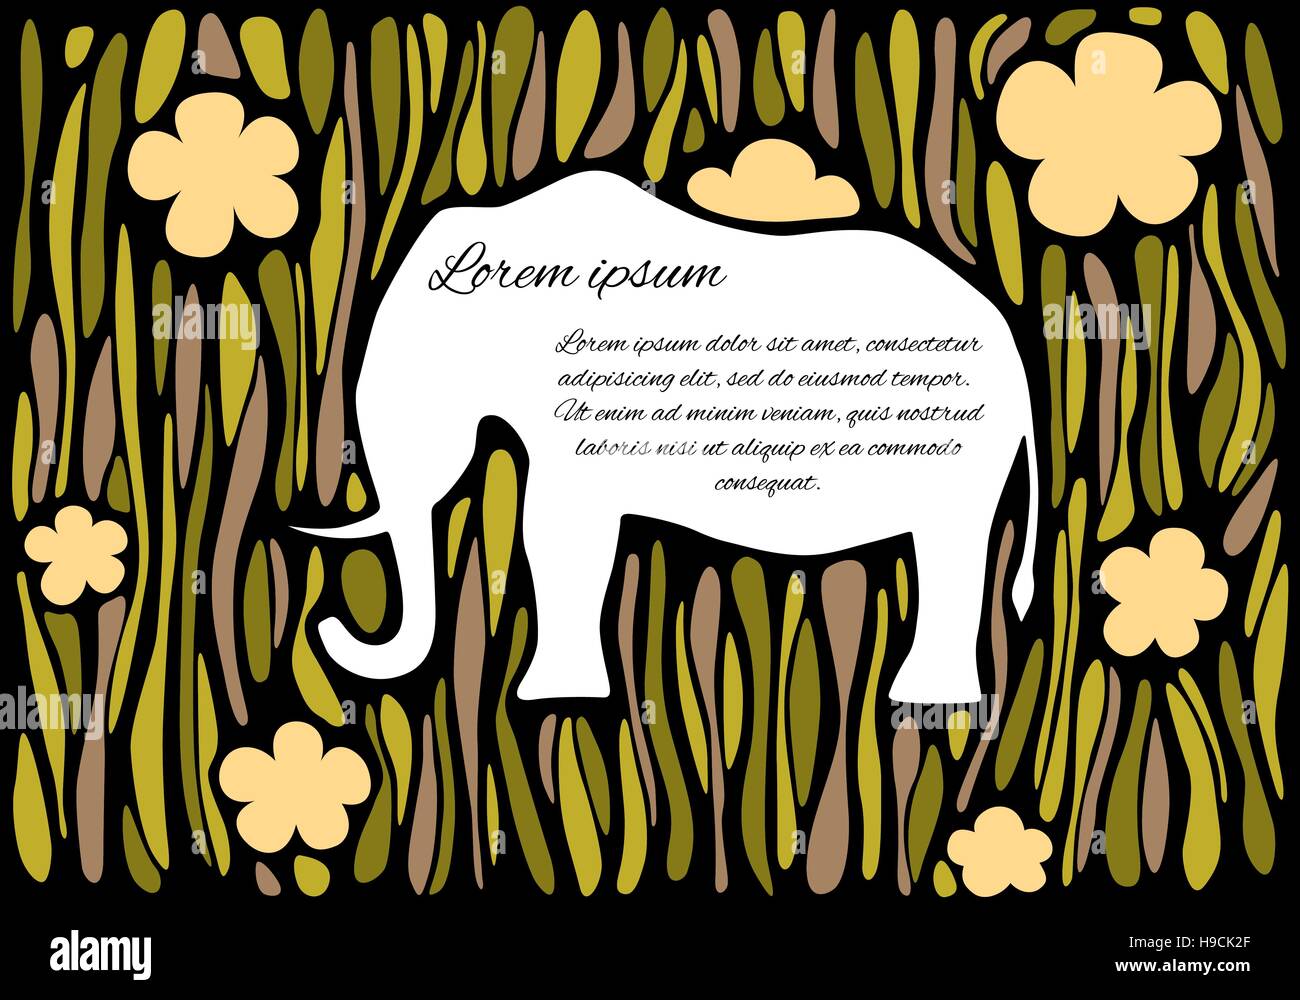 Vector silhouette of an elephant on an abstract jungle background. Can be used as a frame for your text. Stock Vector